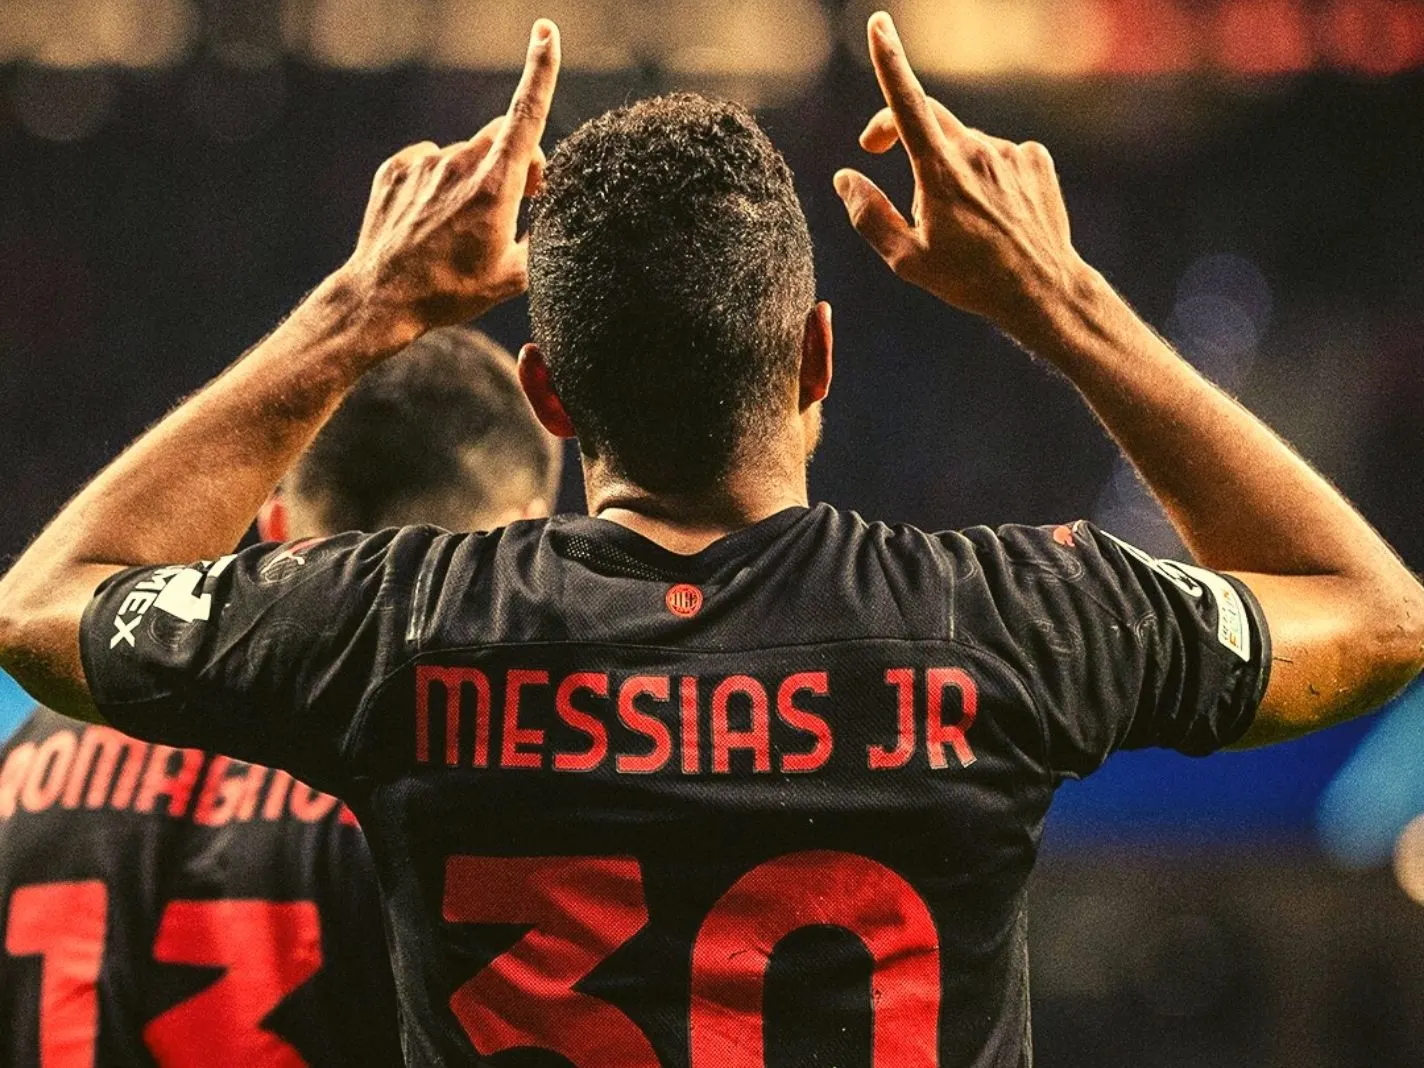 Junior Messias celebrates after scoring a goal against Atletico Madrid